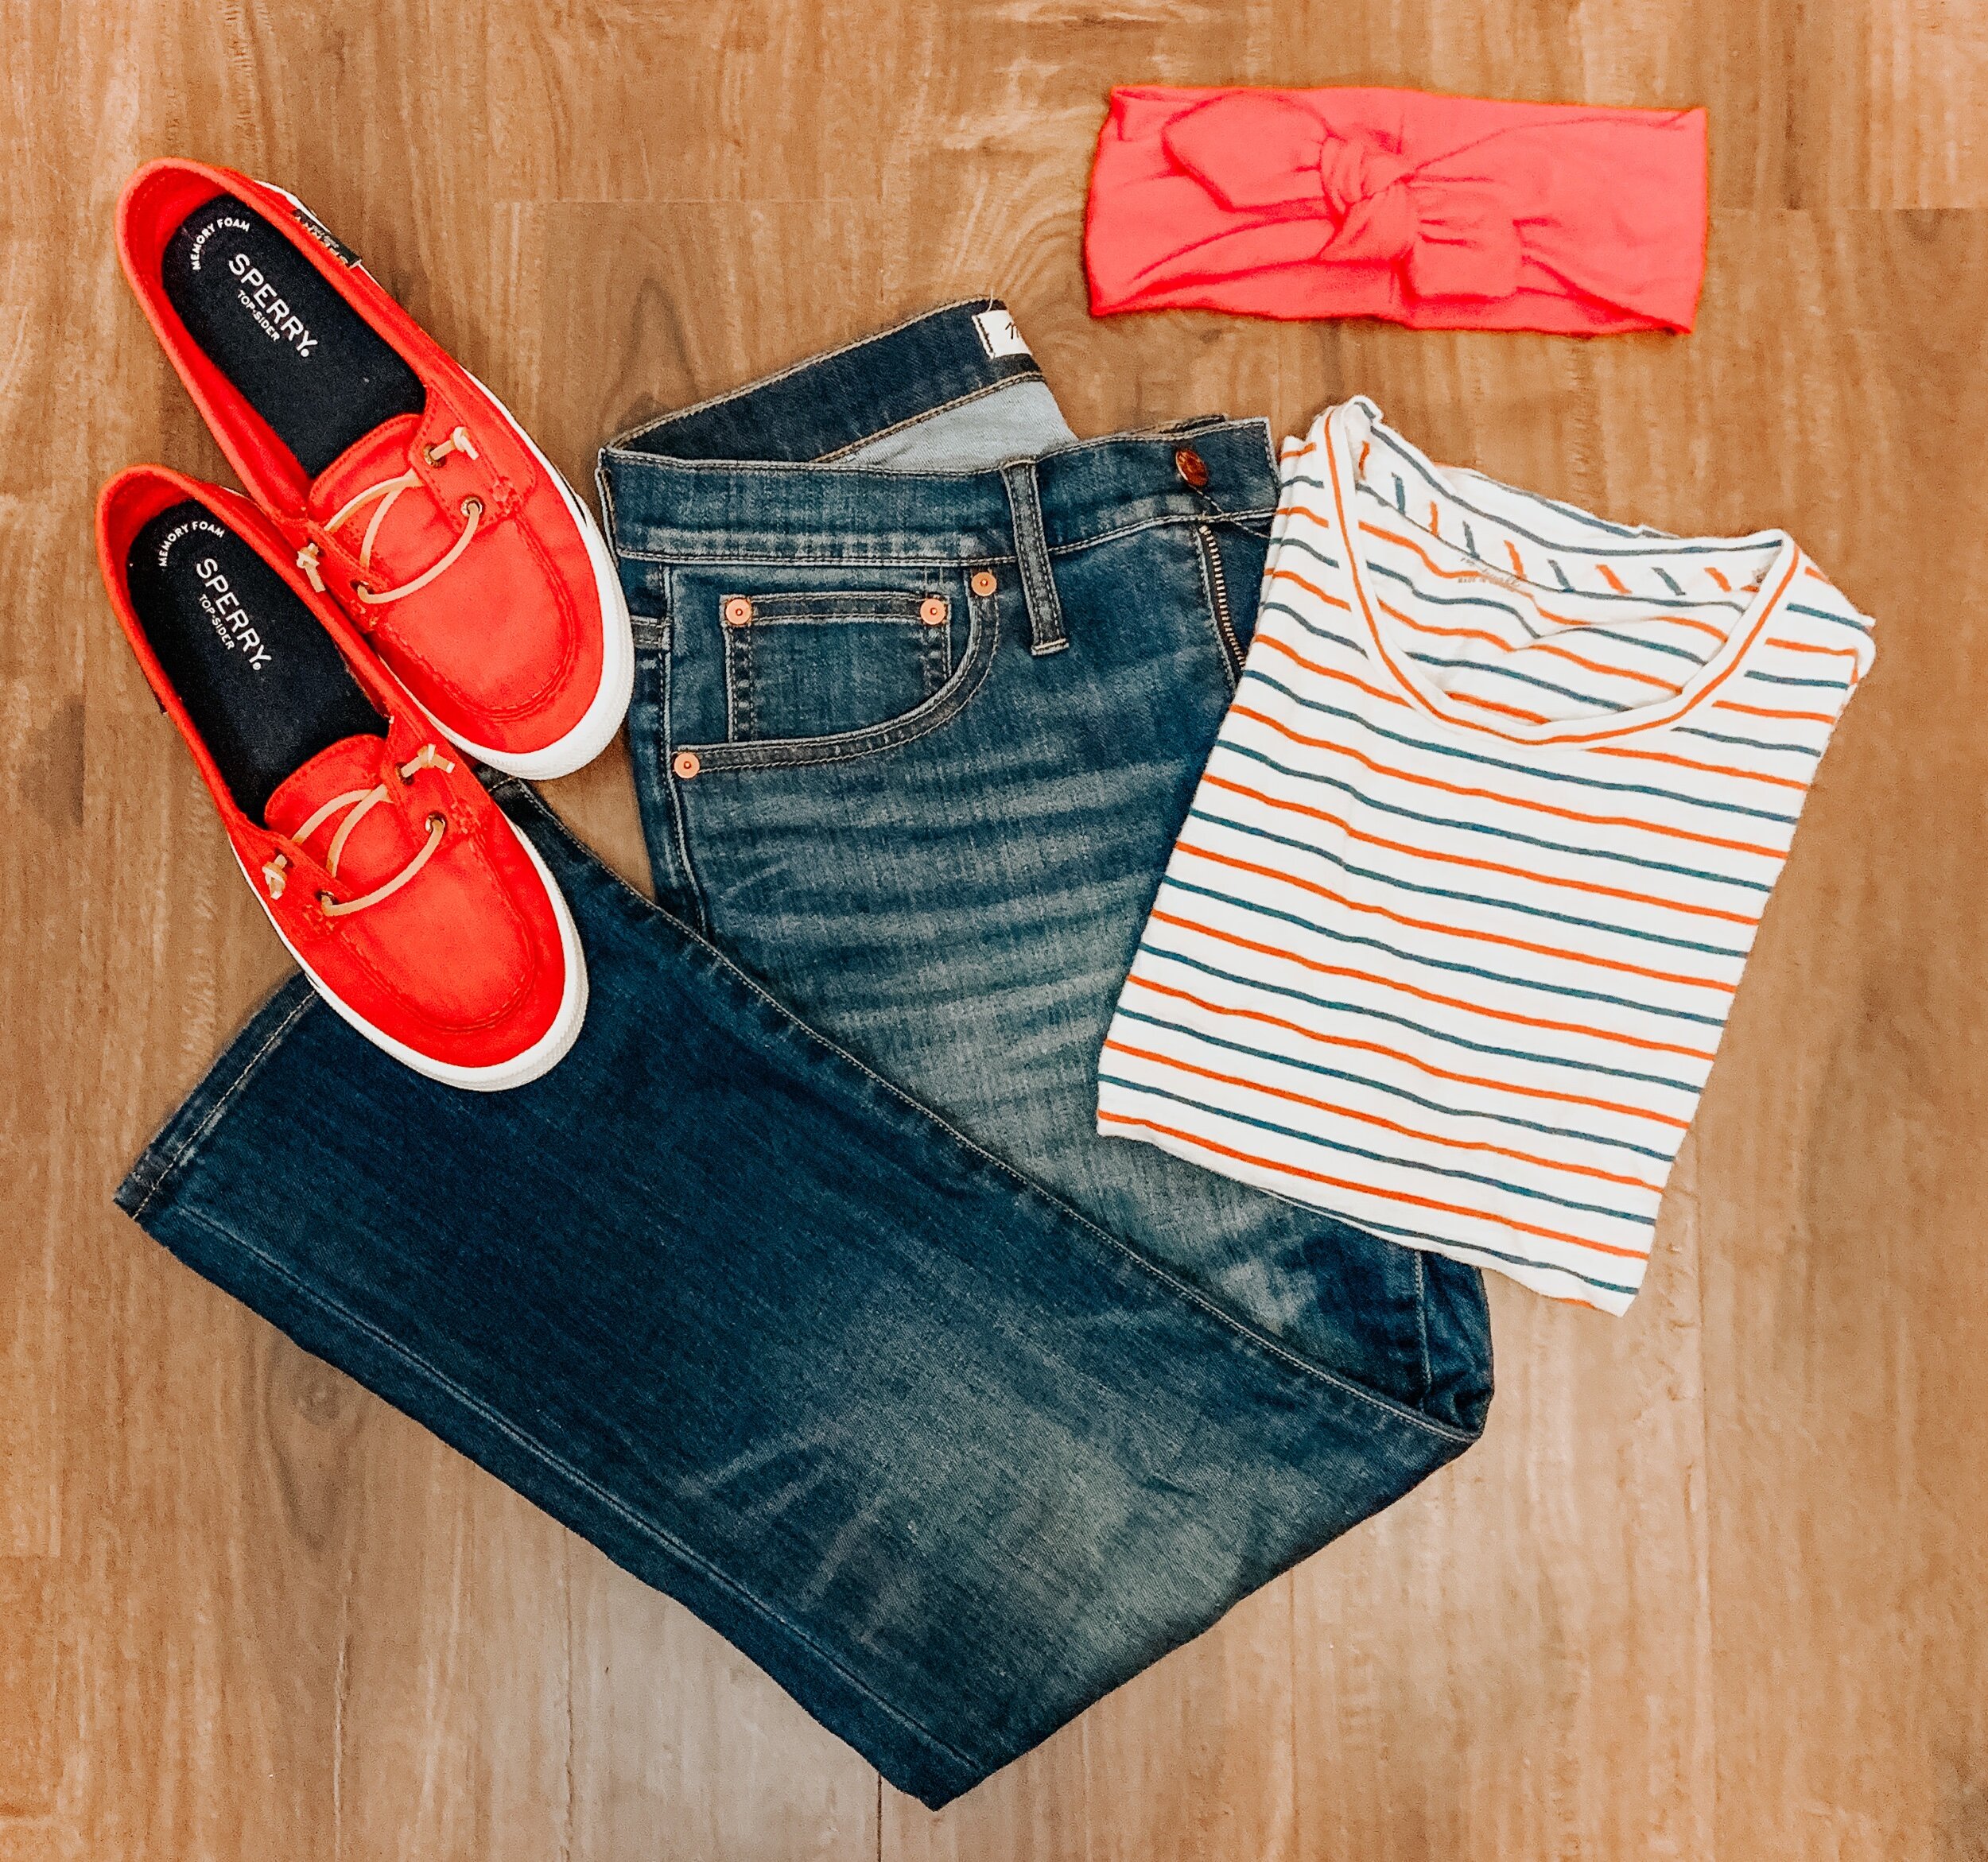 Amazon Headband//Sperry Top-Sider Shoes//Madewell jeansThis outfit screams BBQ and Fireworks!! If you’re worried about bug bites and chilly legs as the night sets in, you can’t go wrong with jeans! This pair from Madewell has become my favorite and …